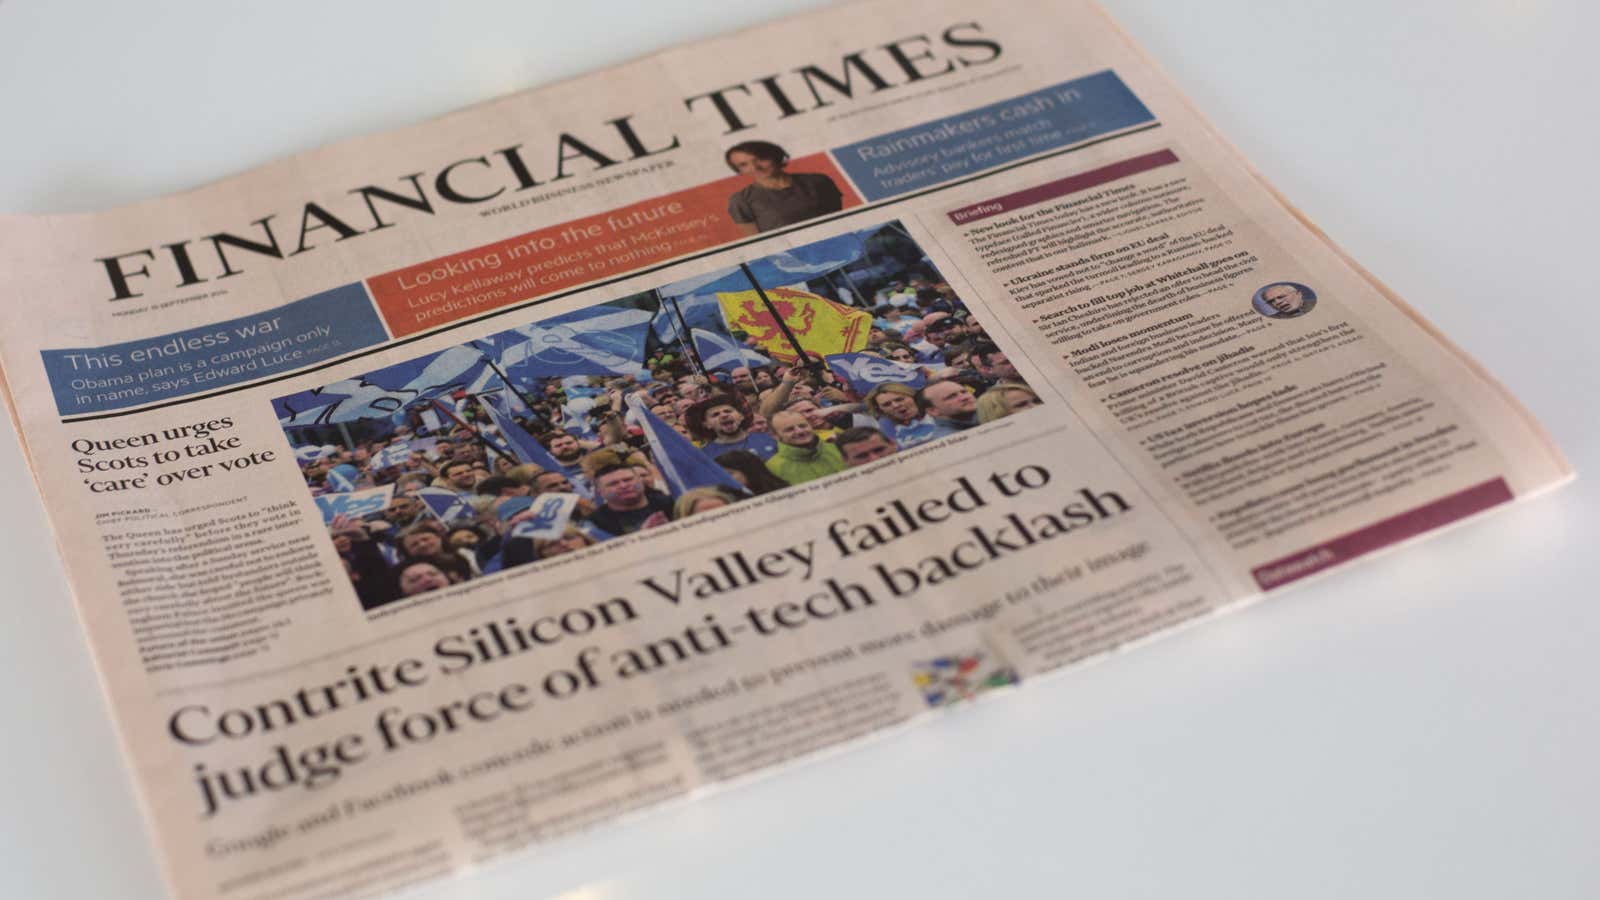 The salmon stays but the FT’s design is changing.